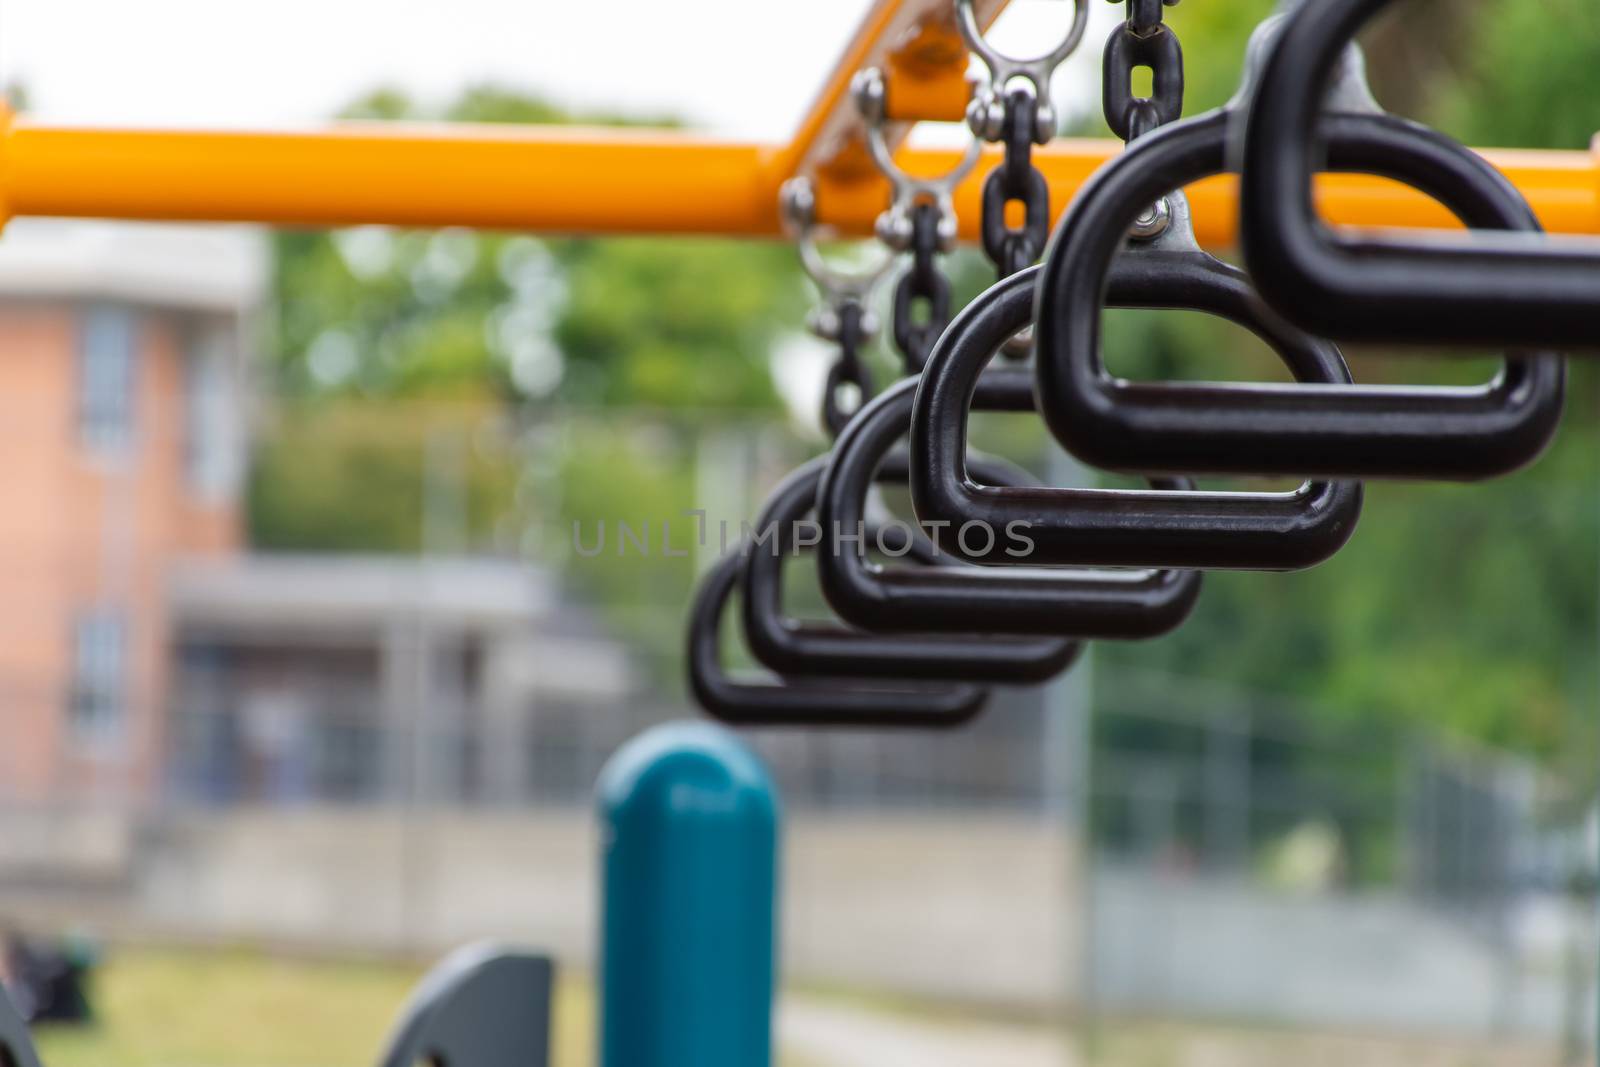 Empty monkey bars at a playground concept looking through at goa by kingmaphotos